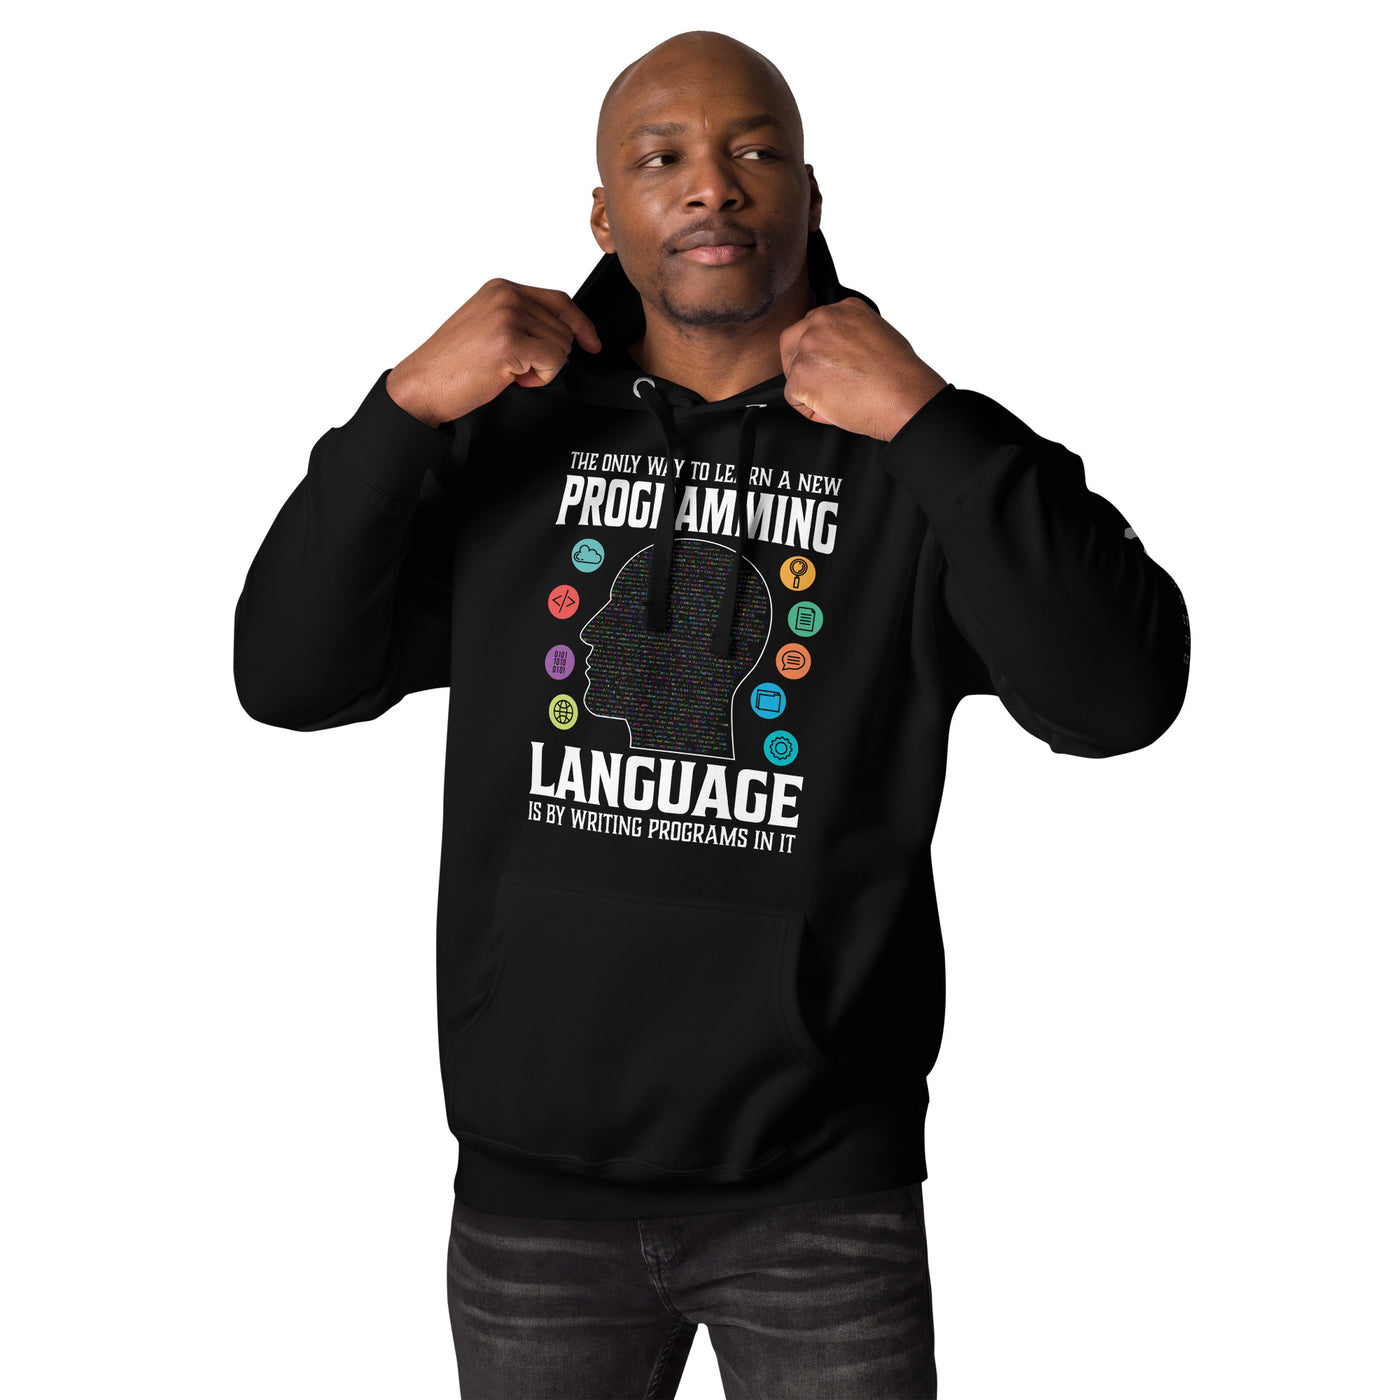 The Only Way to learn a new programming - Unisex Hoodie